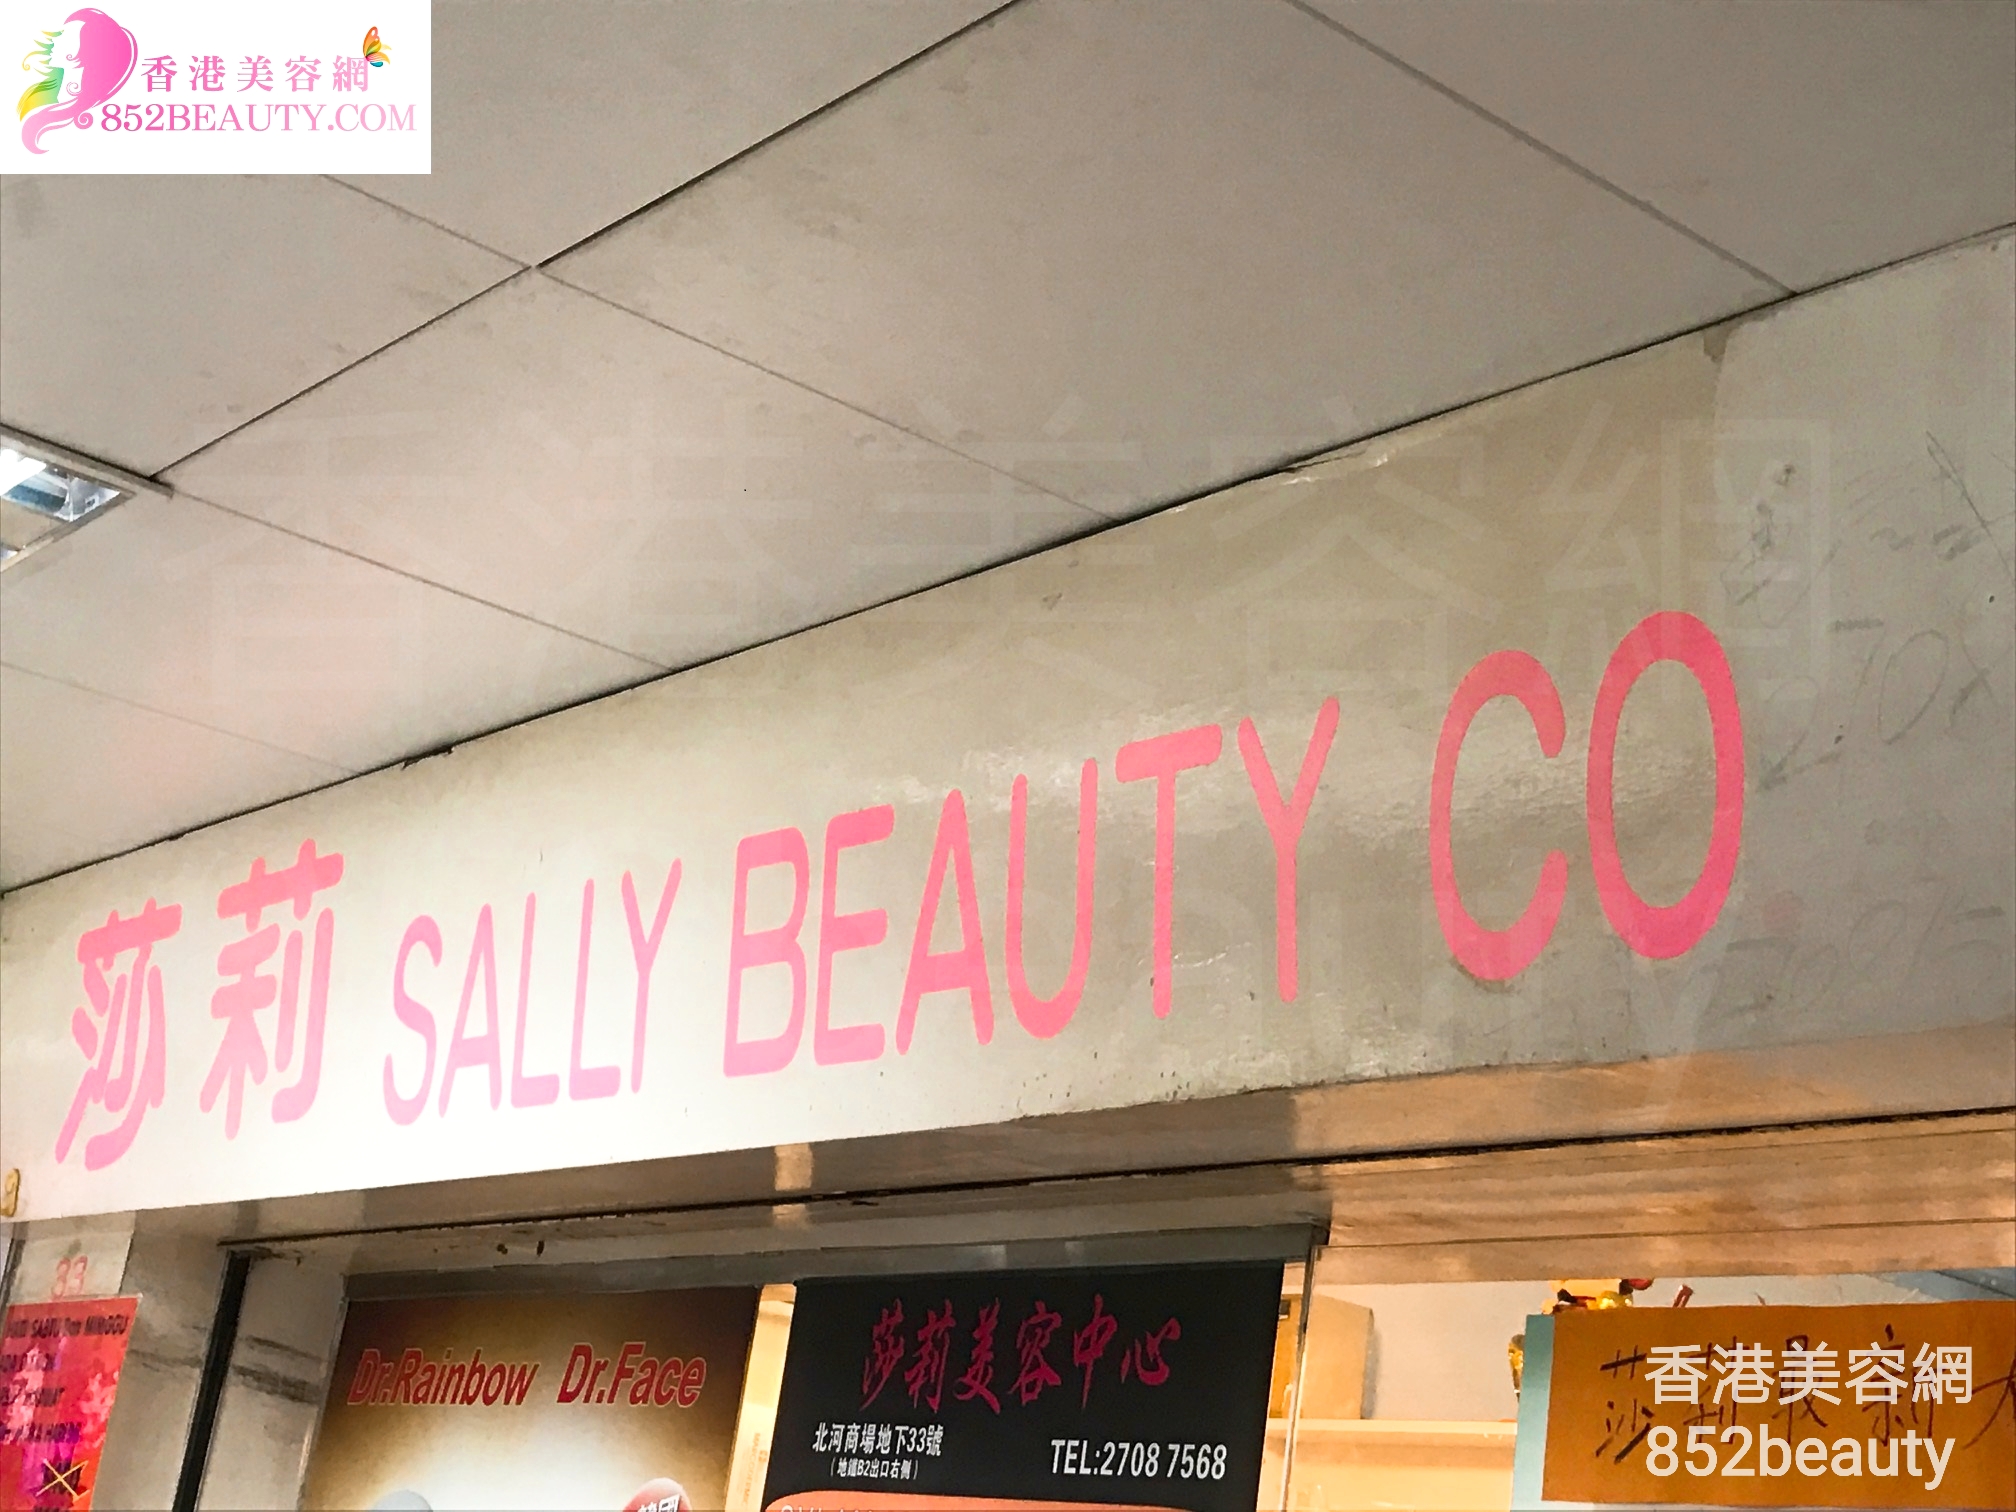 Facial Care: Sally beauty 莎莉美容